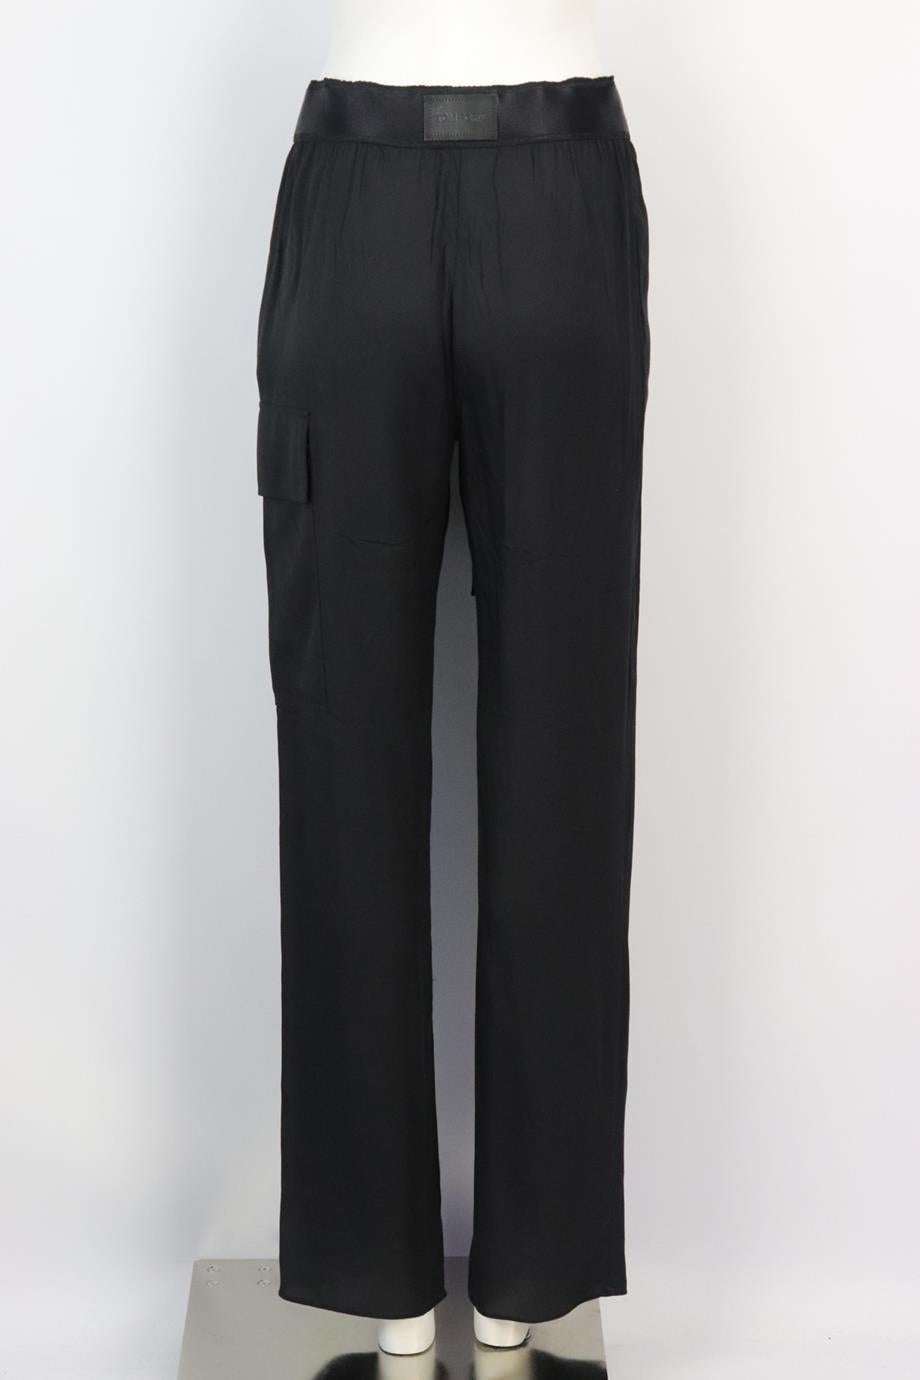 uk size 6 in us pants